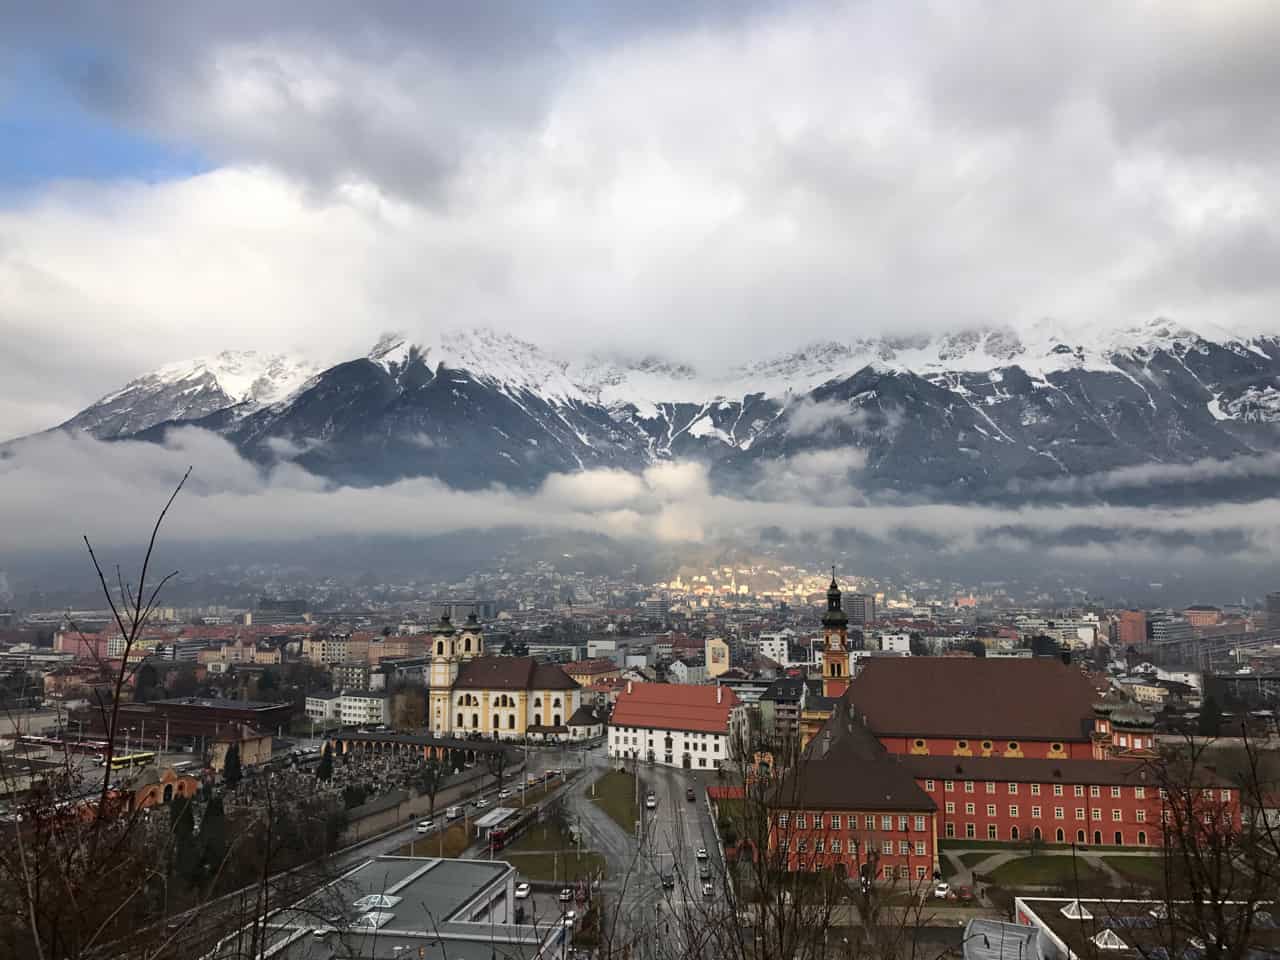 Views over the Nordkette range are a key feature of an Innsbruck itinerary.